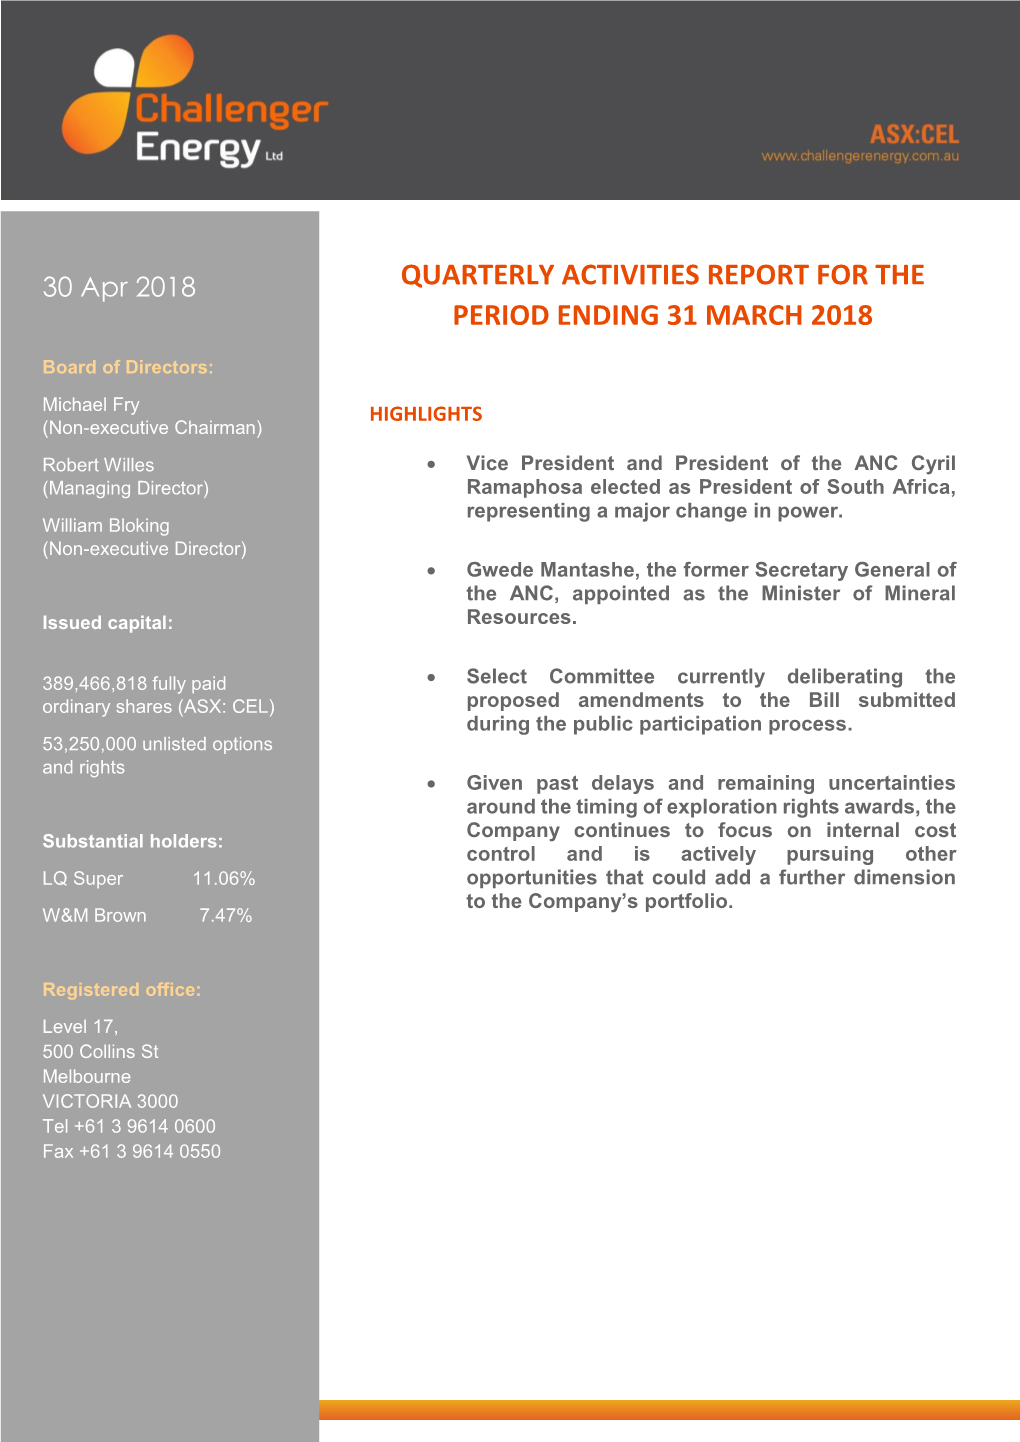 Quarterly Activities Report for the Period Ending 31